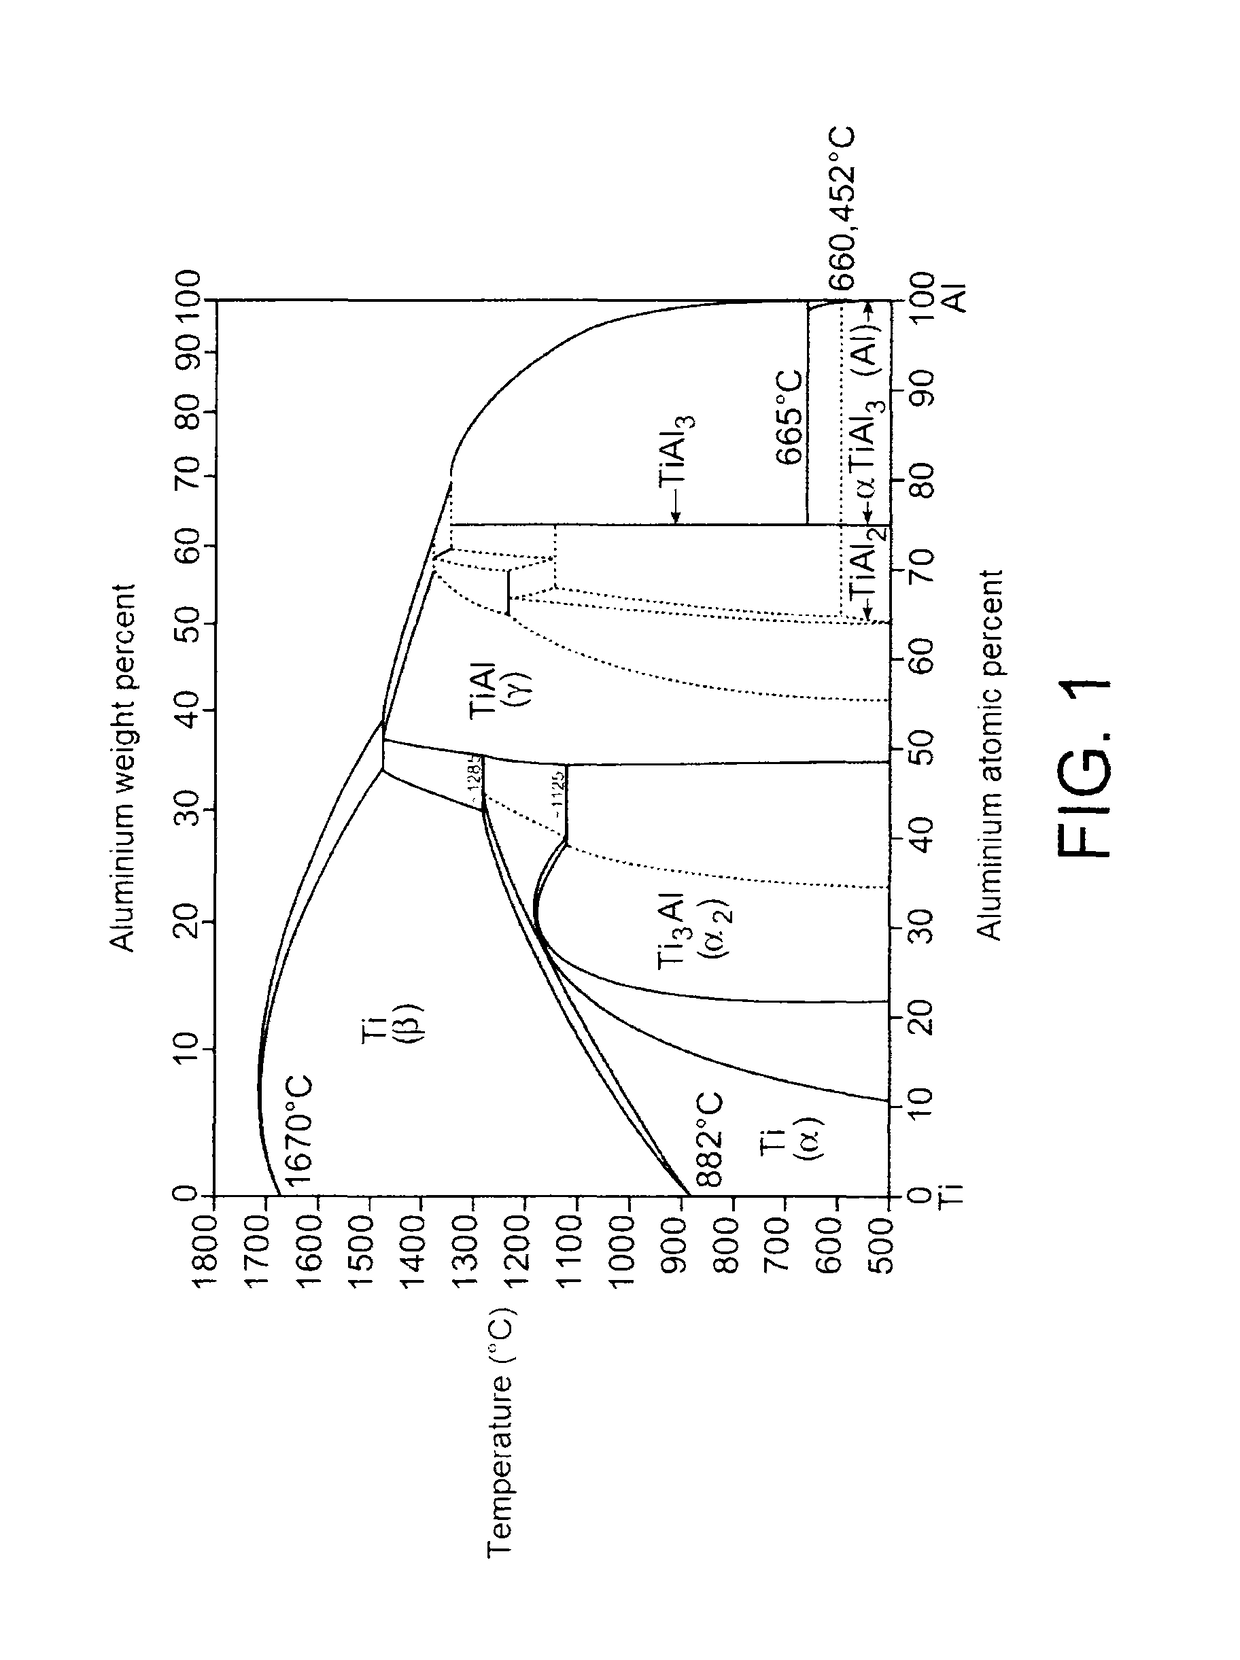 Method for producing an Al/TiC nanocomposite material